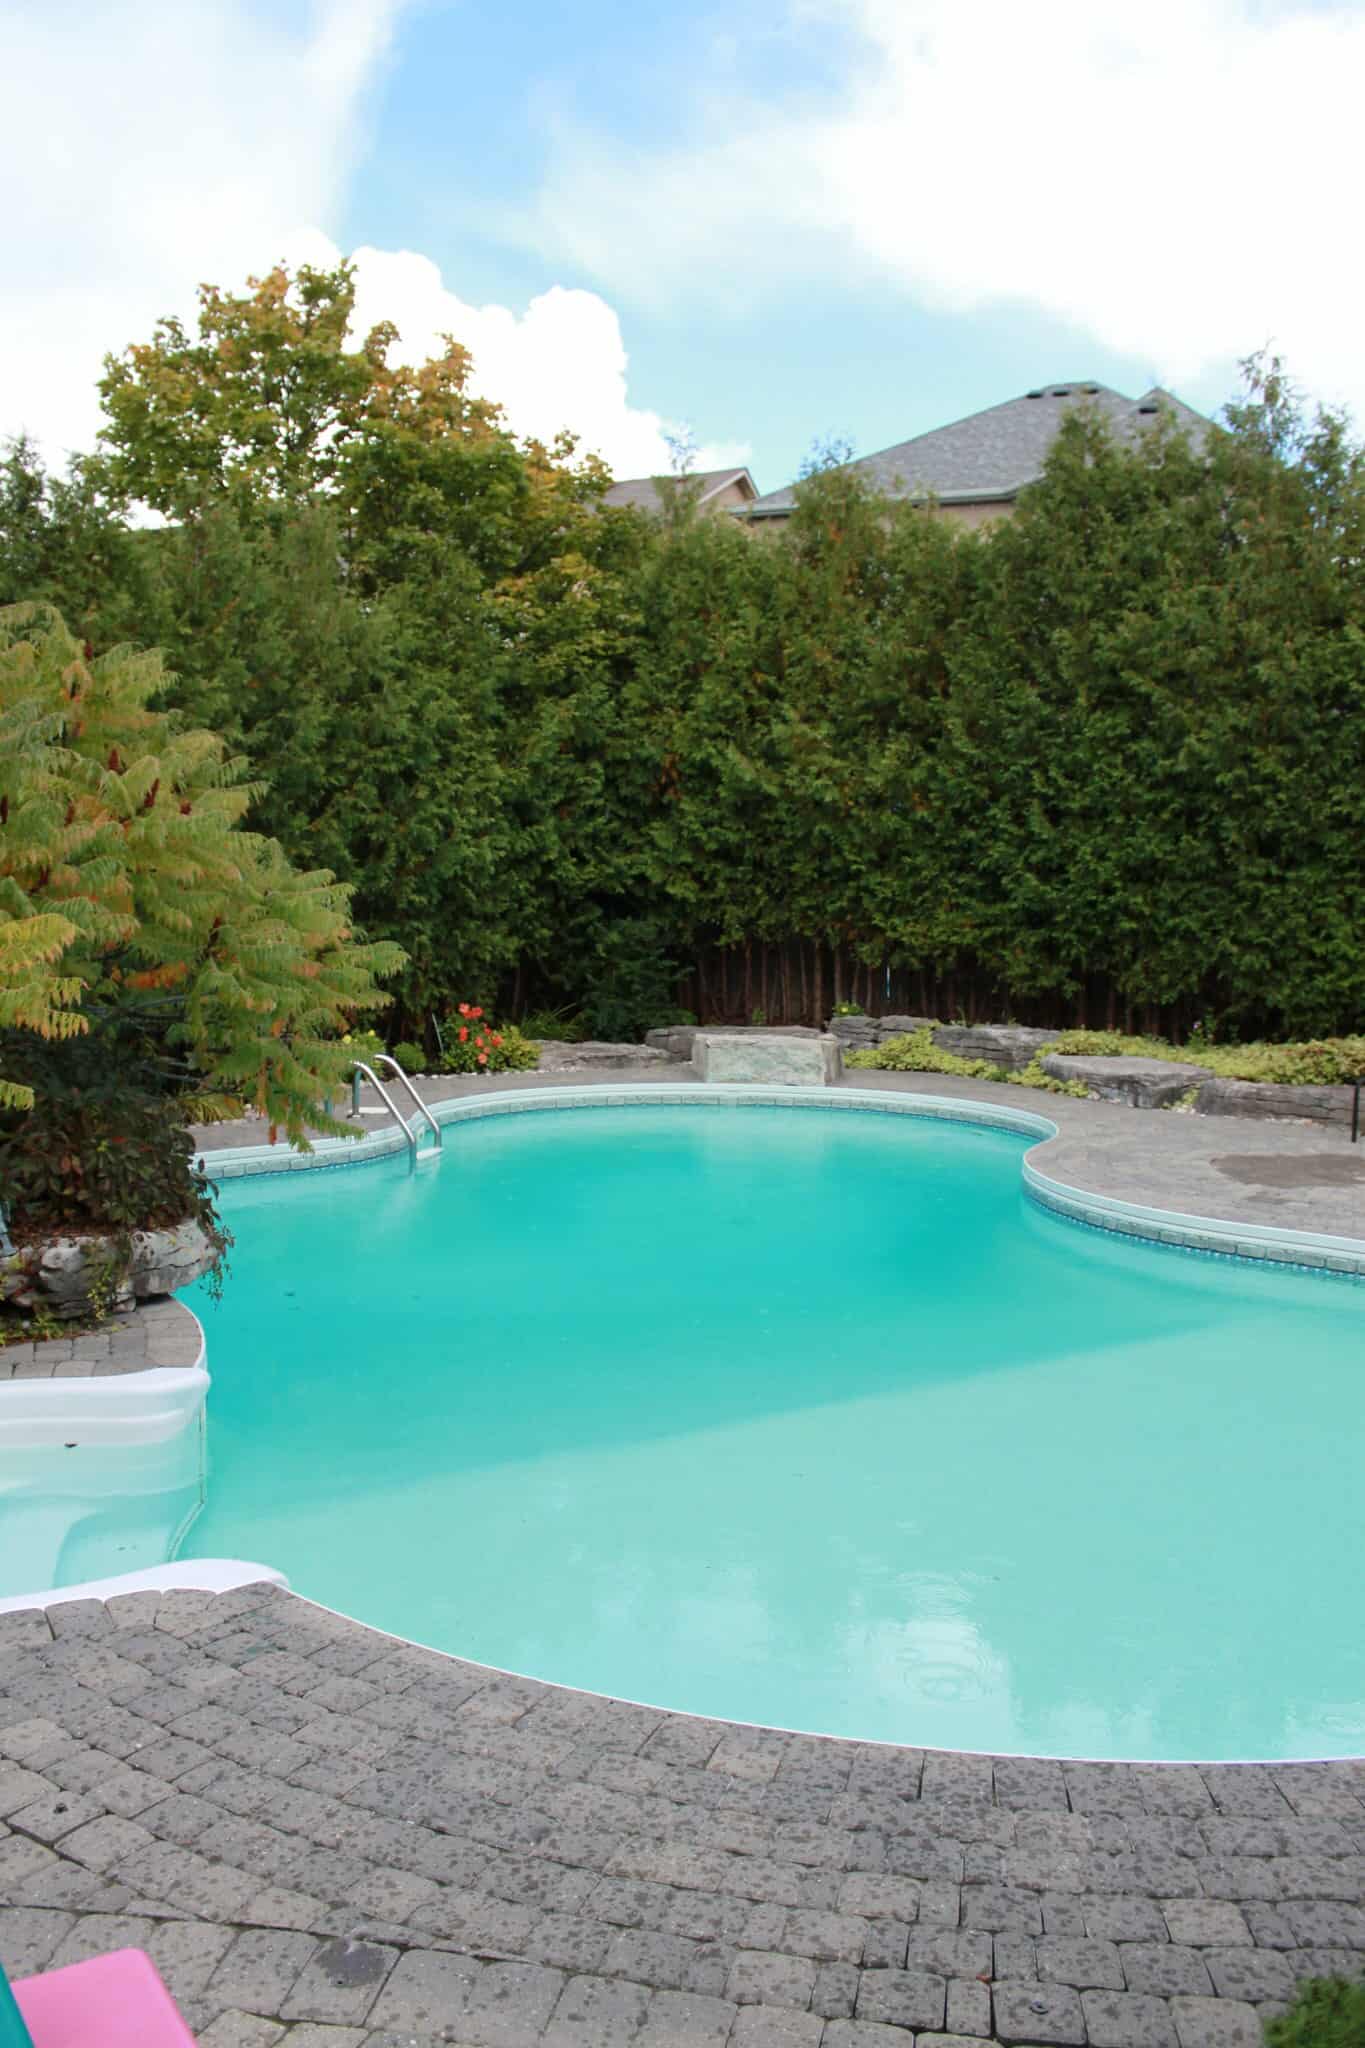 How Do Salt Water Pools Disinfect?